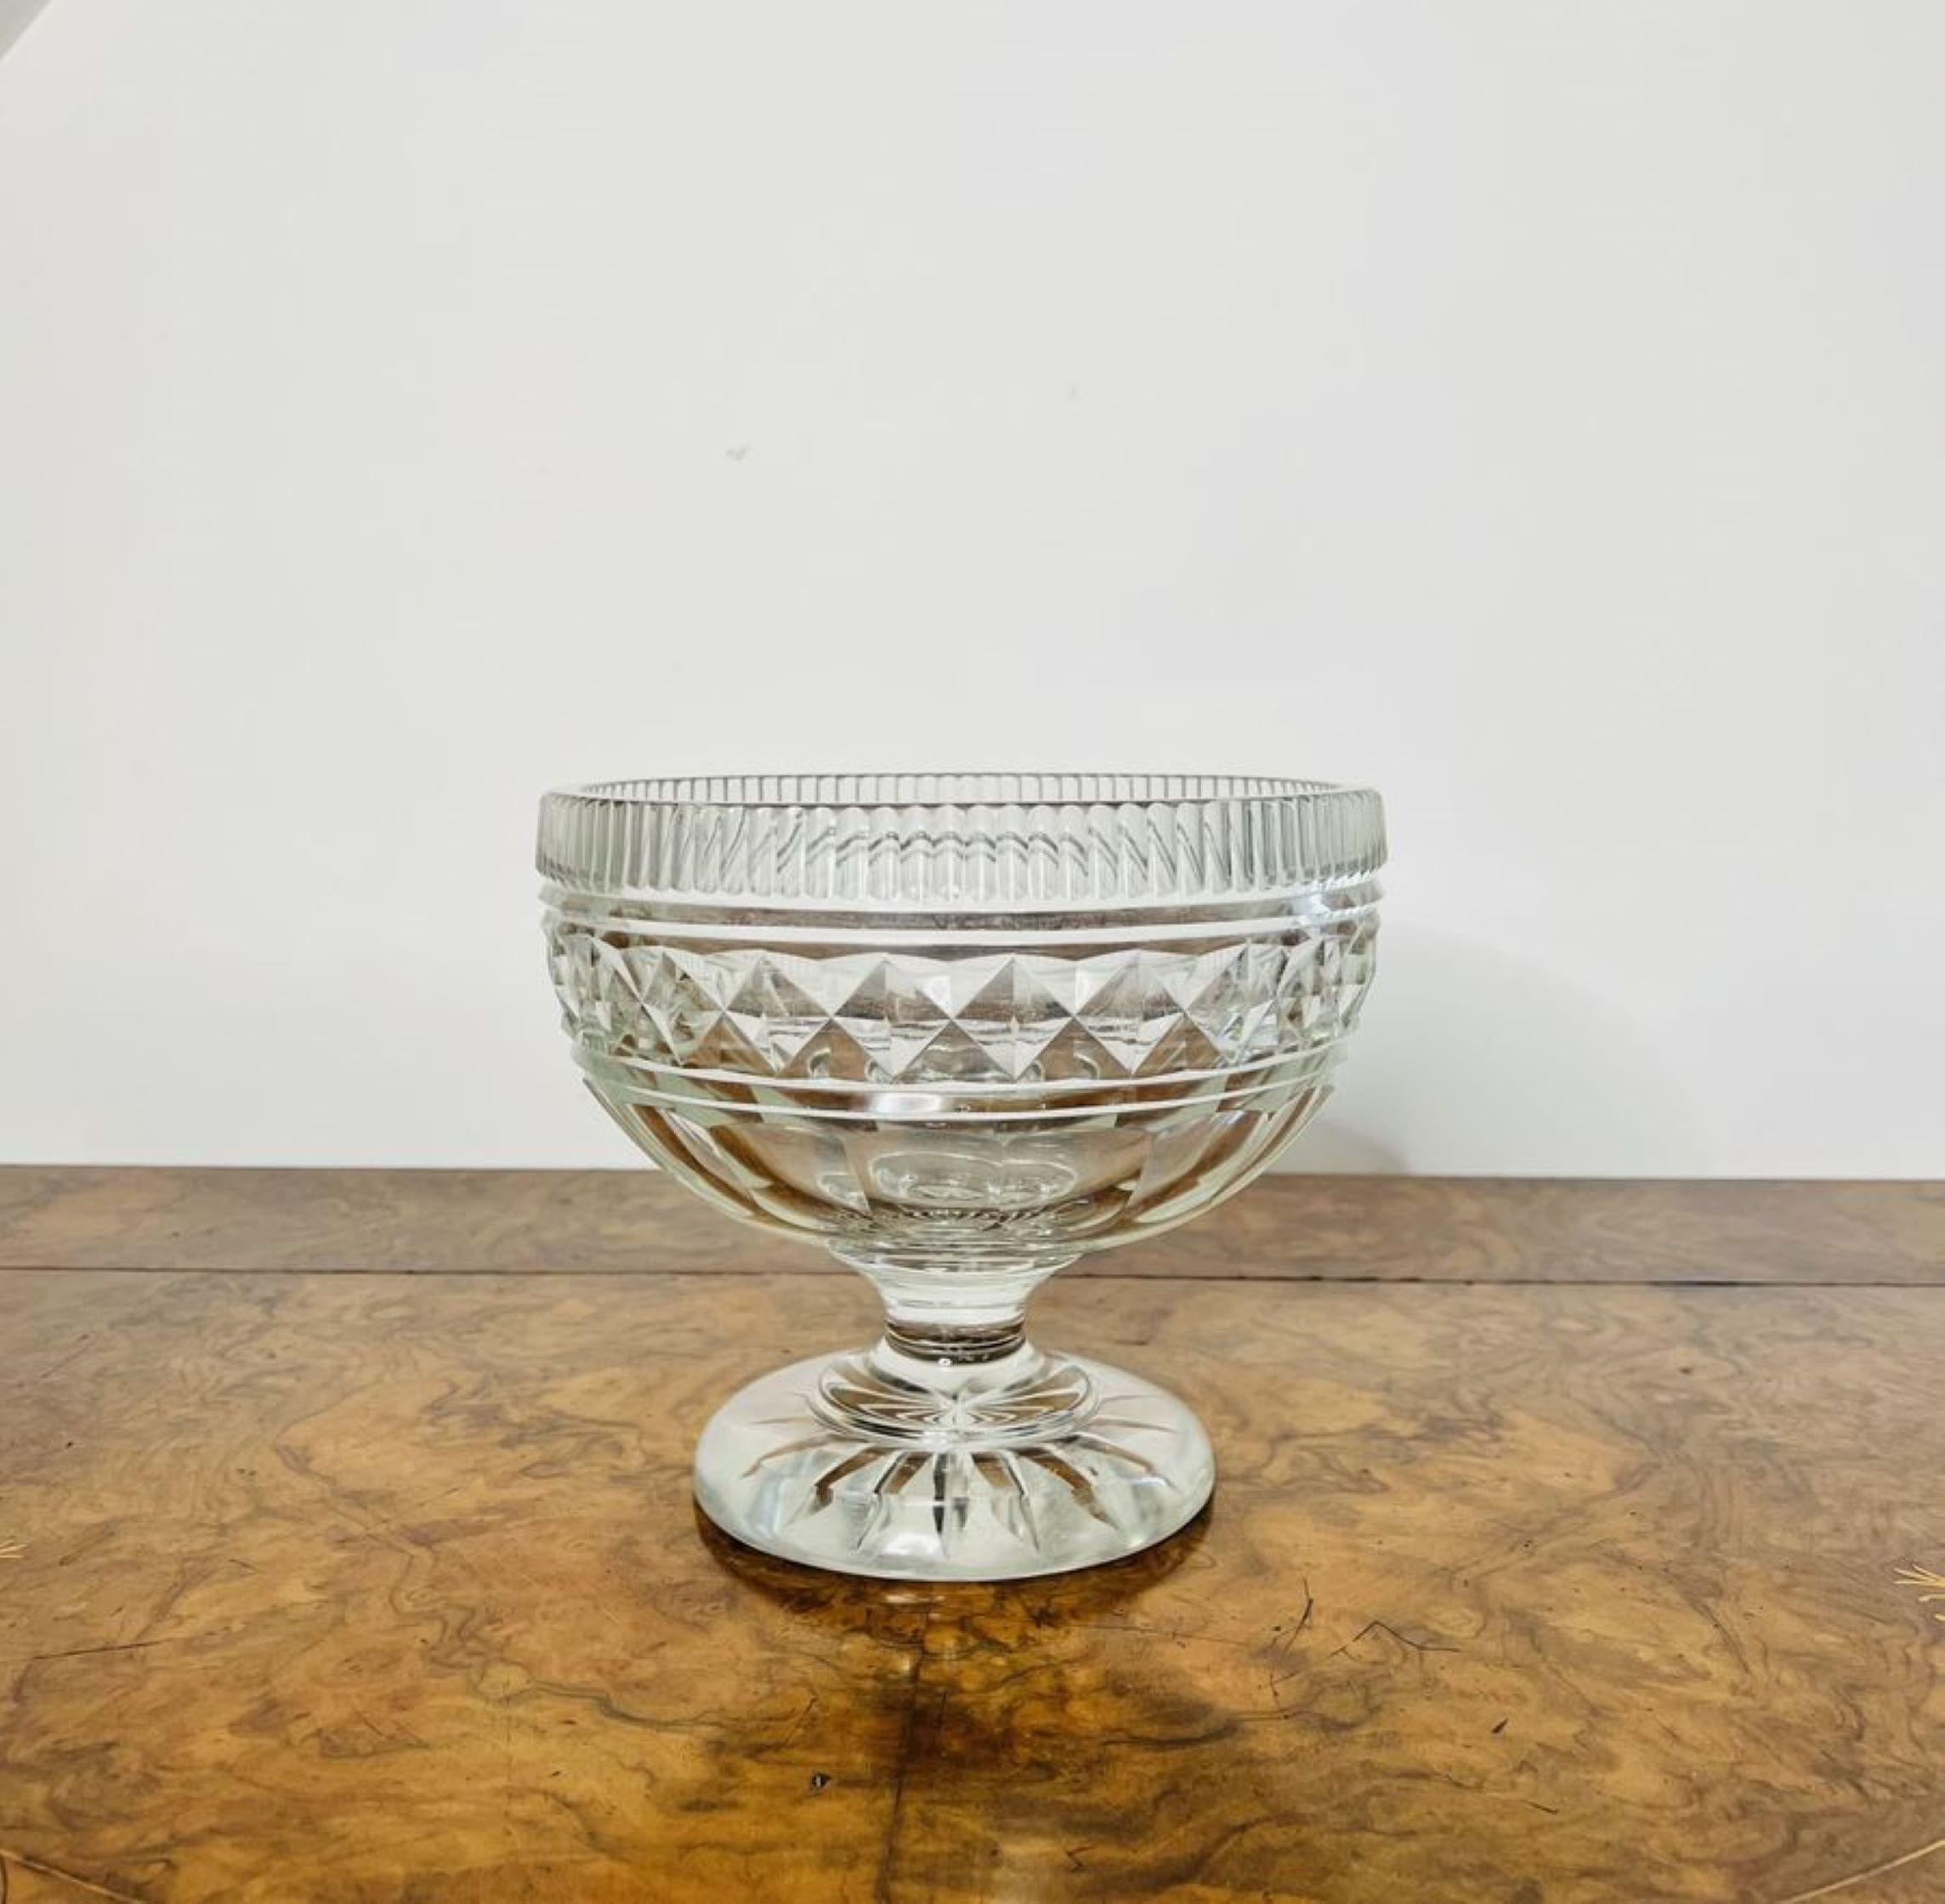 Quality antique Victorian cut glass bowl having a quality Victorian cut glass bowl raised on a pedestal with a circular base.

D. 1880